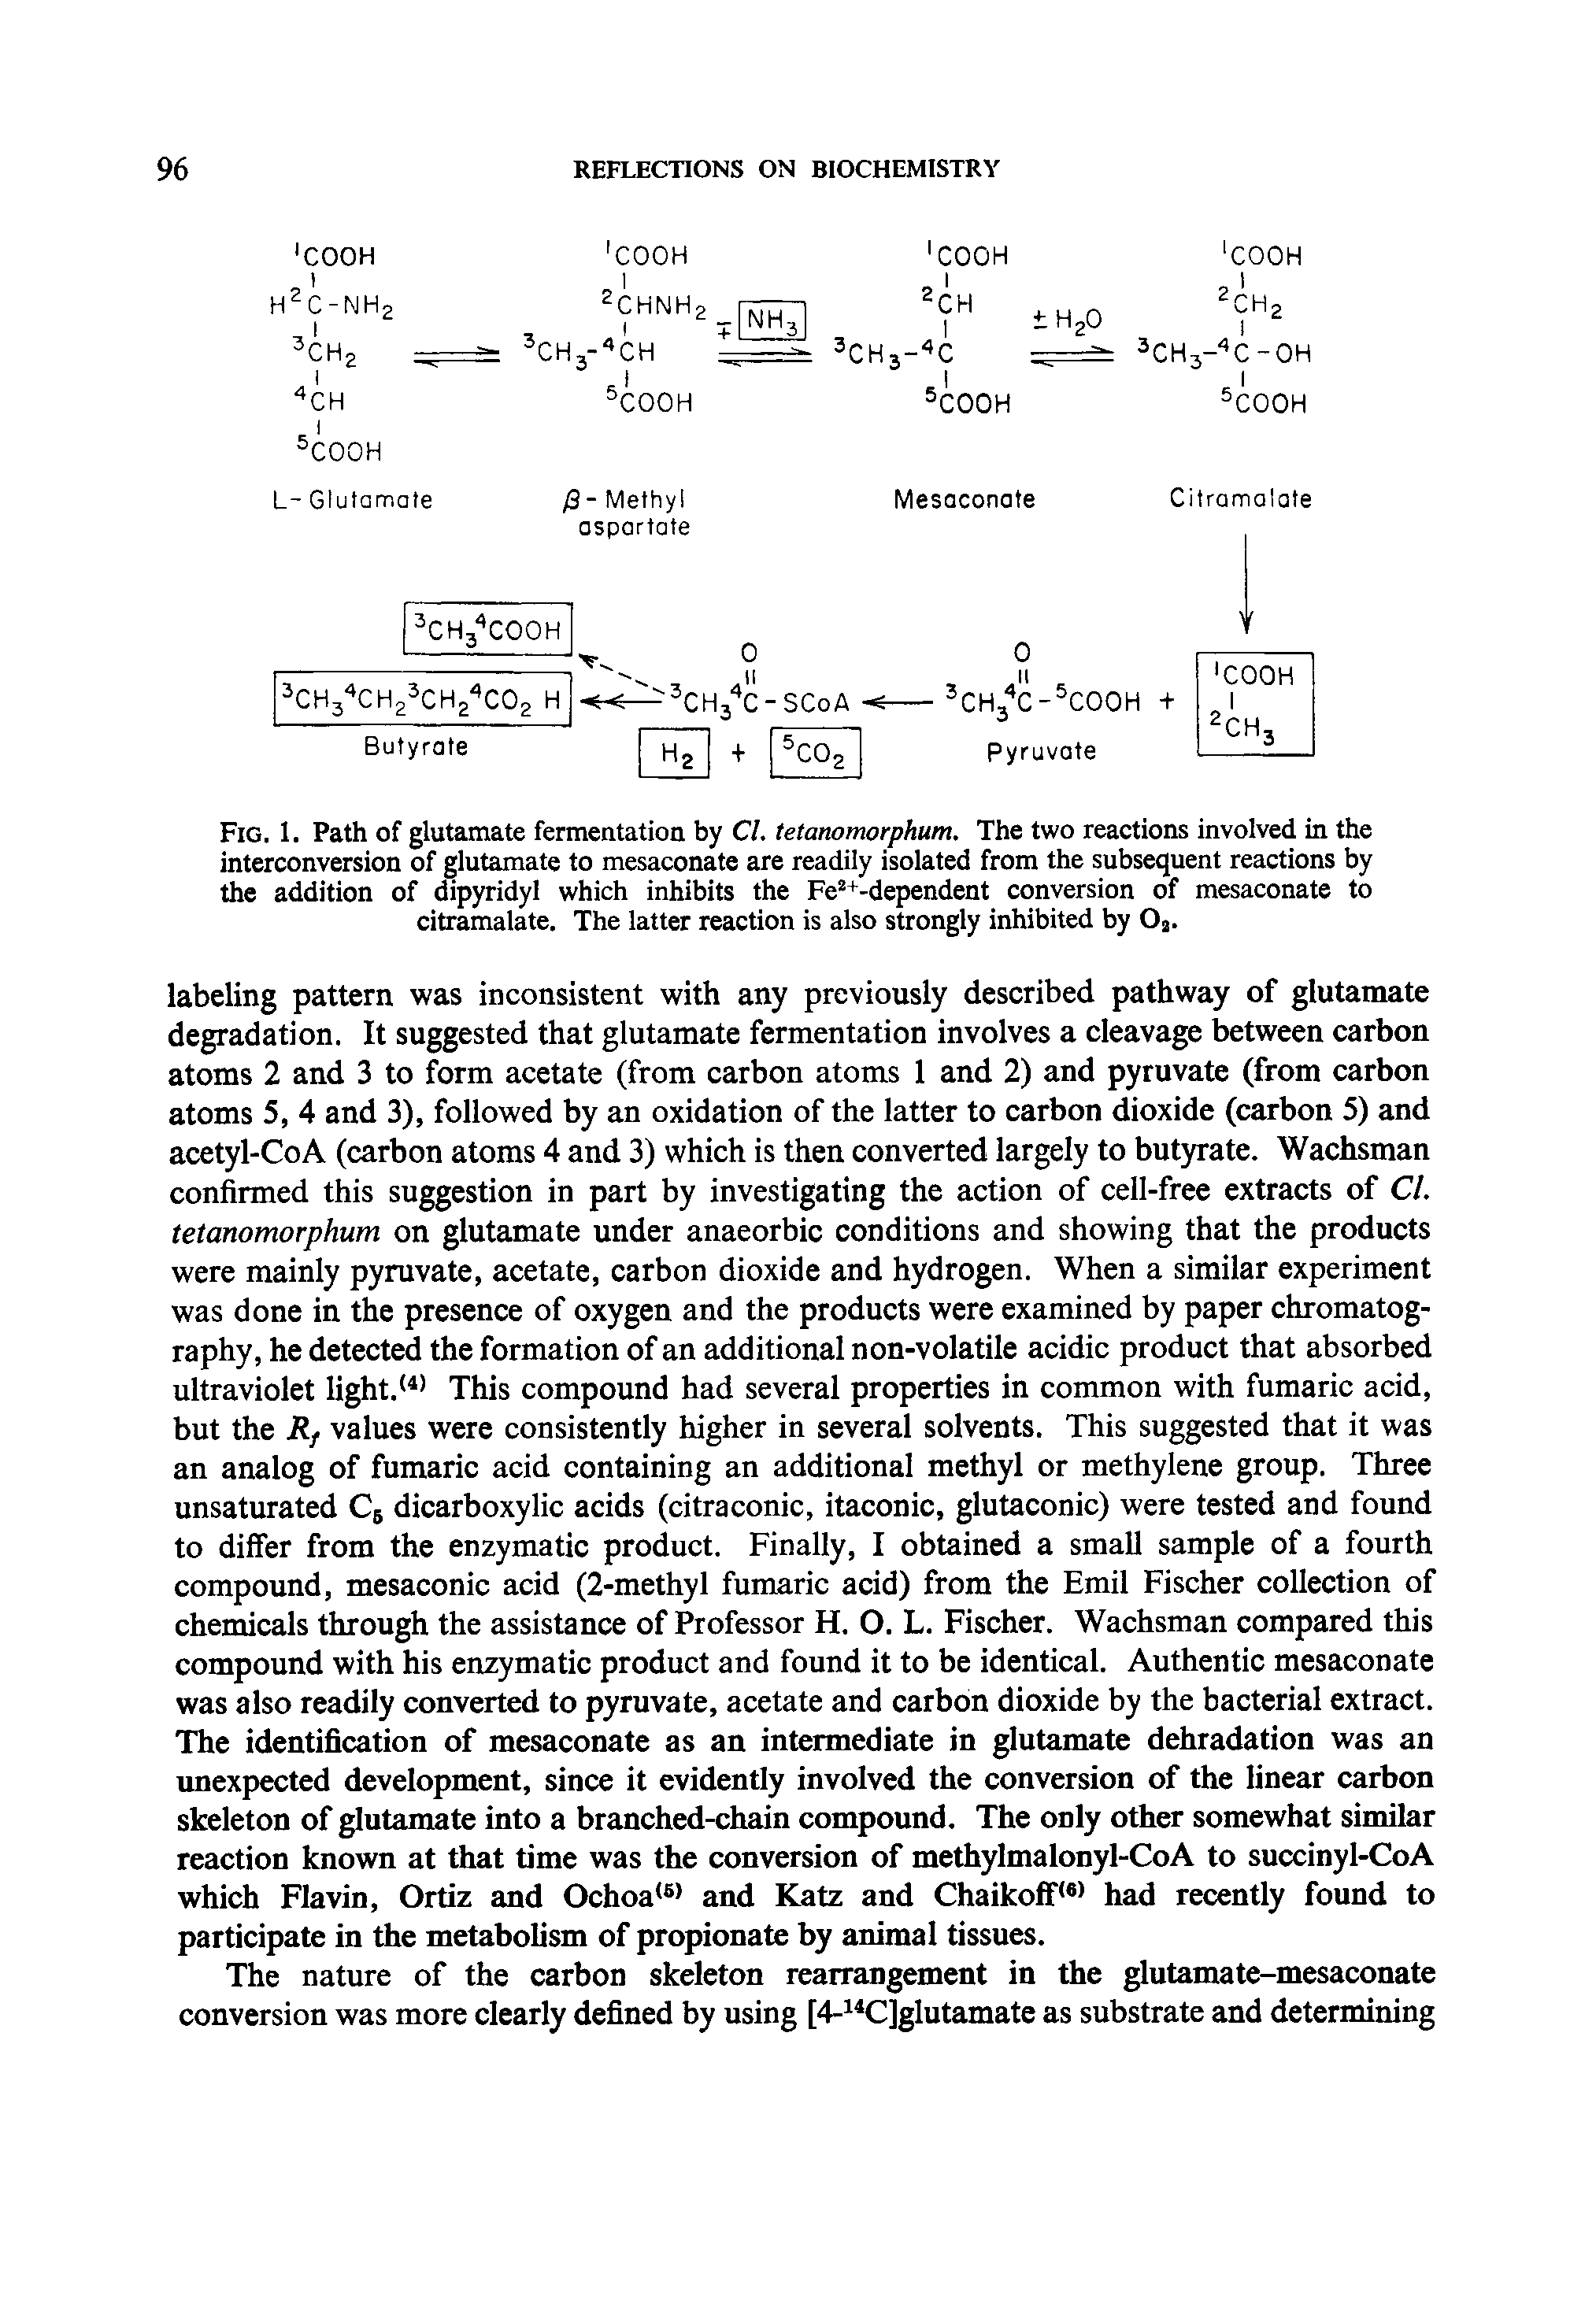 Fig. 1. Path of glutamate fermentation by Cl. tetanomorphum. The two reactions involved in the interconversion of glutamate to mesaconate are readily isolated from the subsequent reactions by the addition of oipyridyl which inhibits the Fe +-dependent conversion of mesaconate to citramalate. The latter reaction is also strongly inhibited by Og.